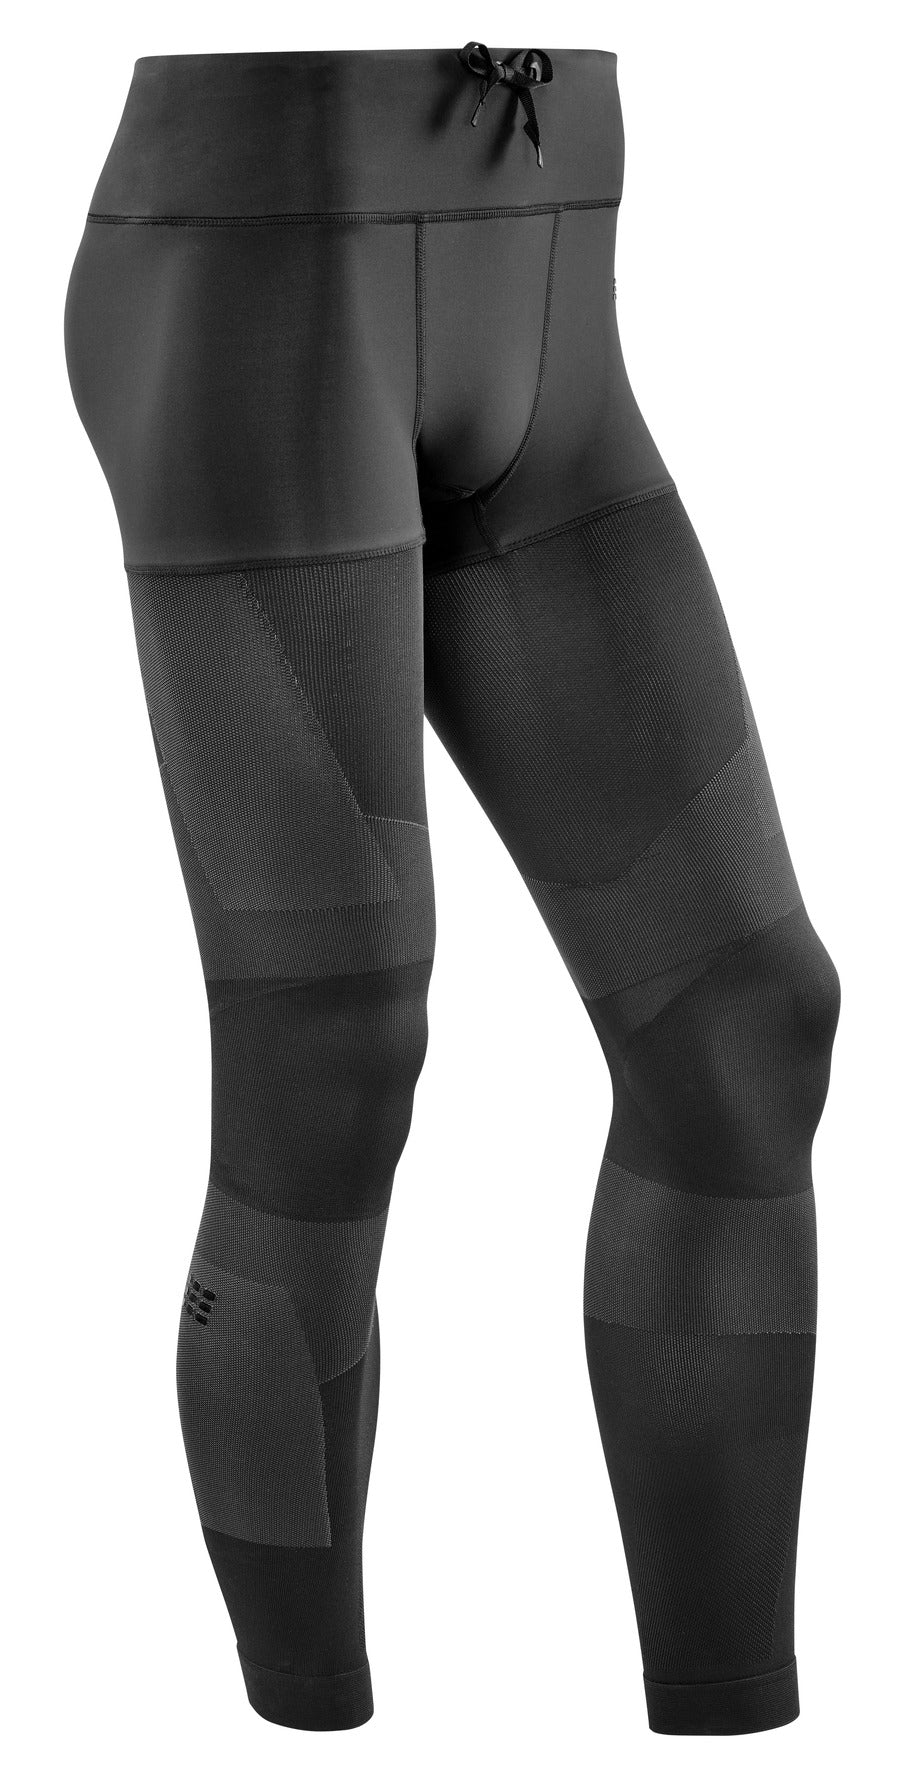 Skins Mens Series 5 Travel & Recovery 2-in-1 Shorts Tights (Black)